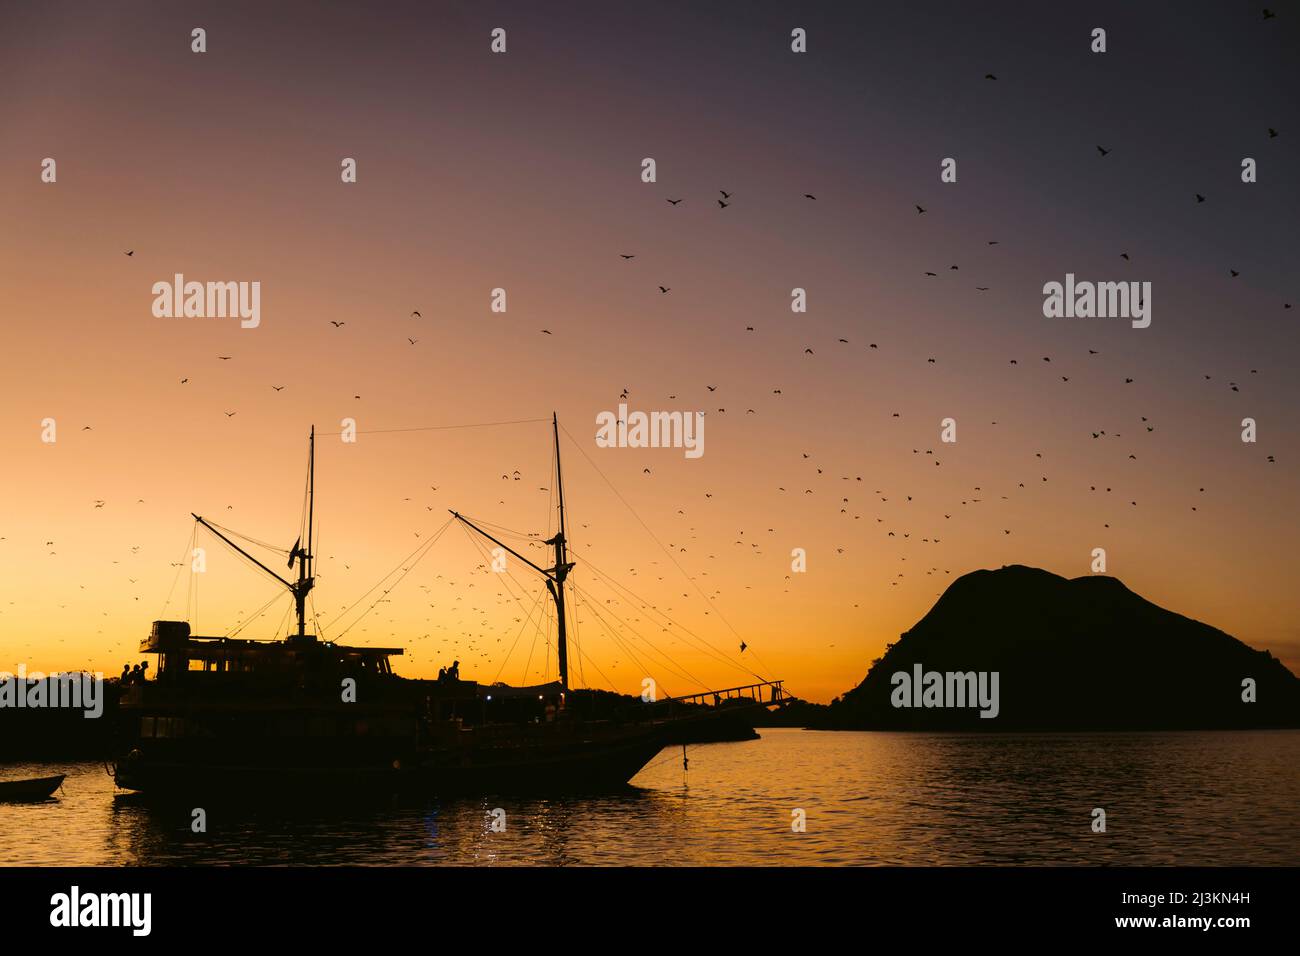 Silhouetted flock of birds flying in a sunset sky over water and sailing vessel along a coastline, Komodo National Park; East Nusa Tenggara, Indonesia Stock Photo